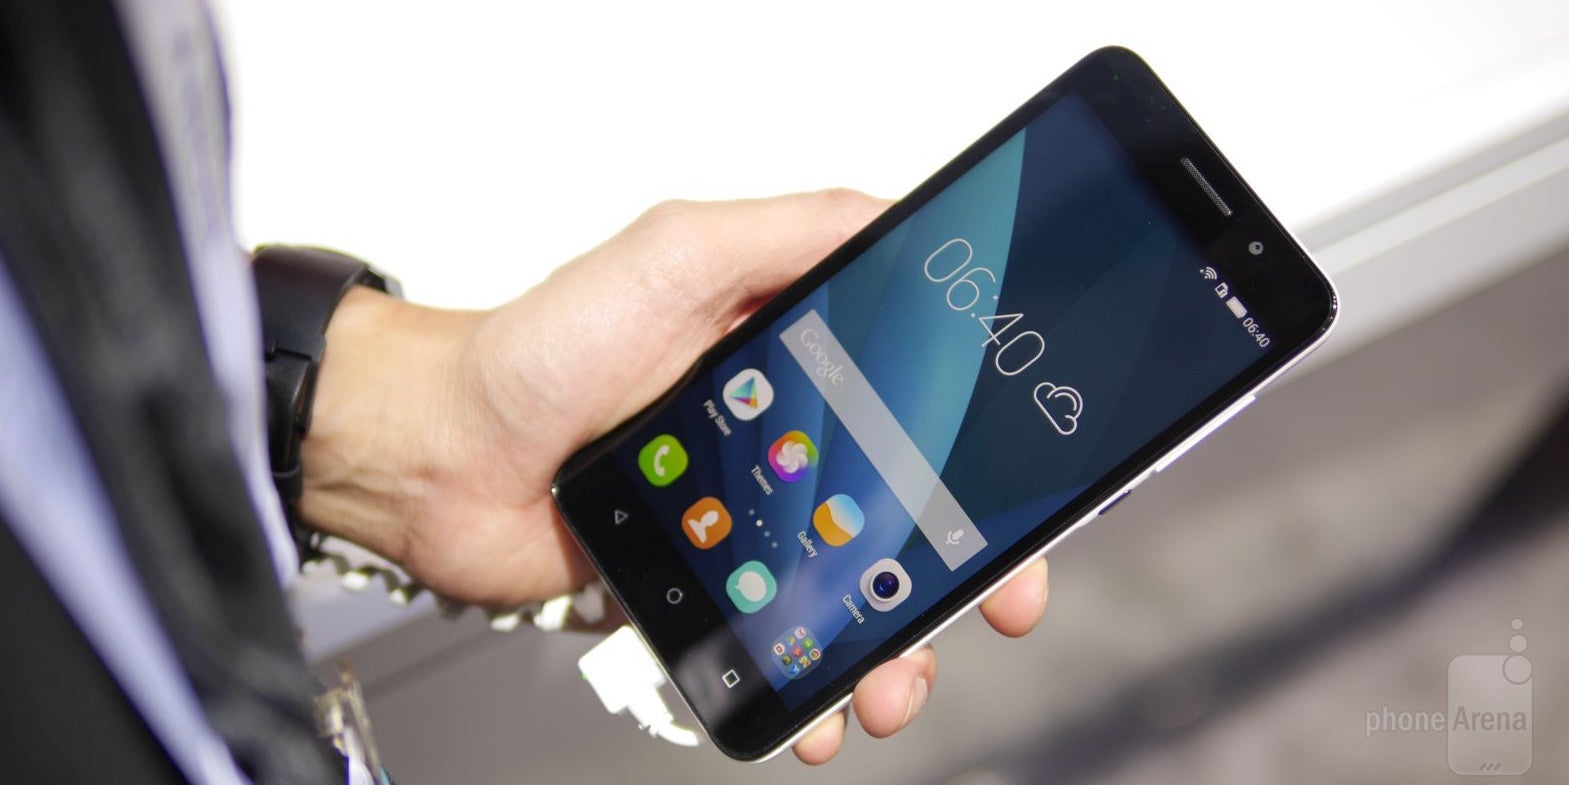 Huawei Honor 4X hands-on